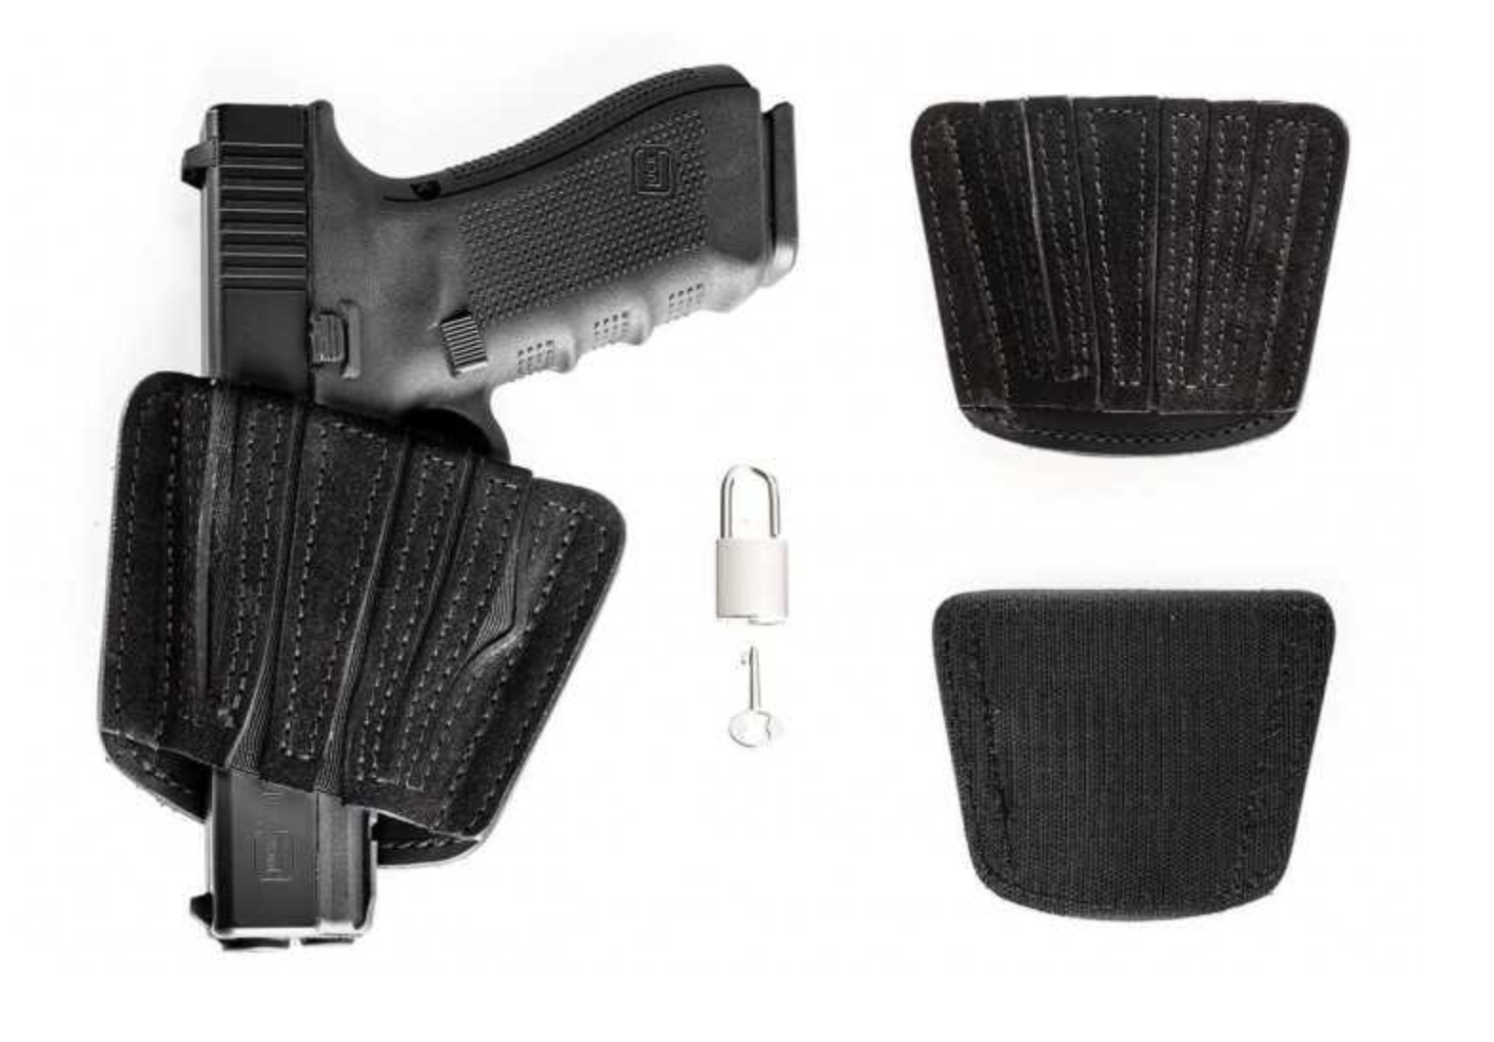 1VB010 – ACROSS CITY V.B. FOR HOLSTERS AND MAGAZINES CASES